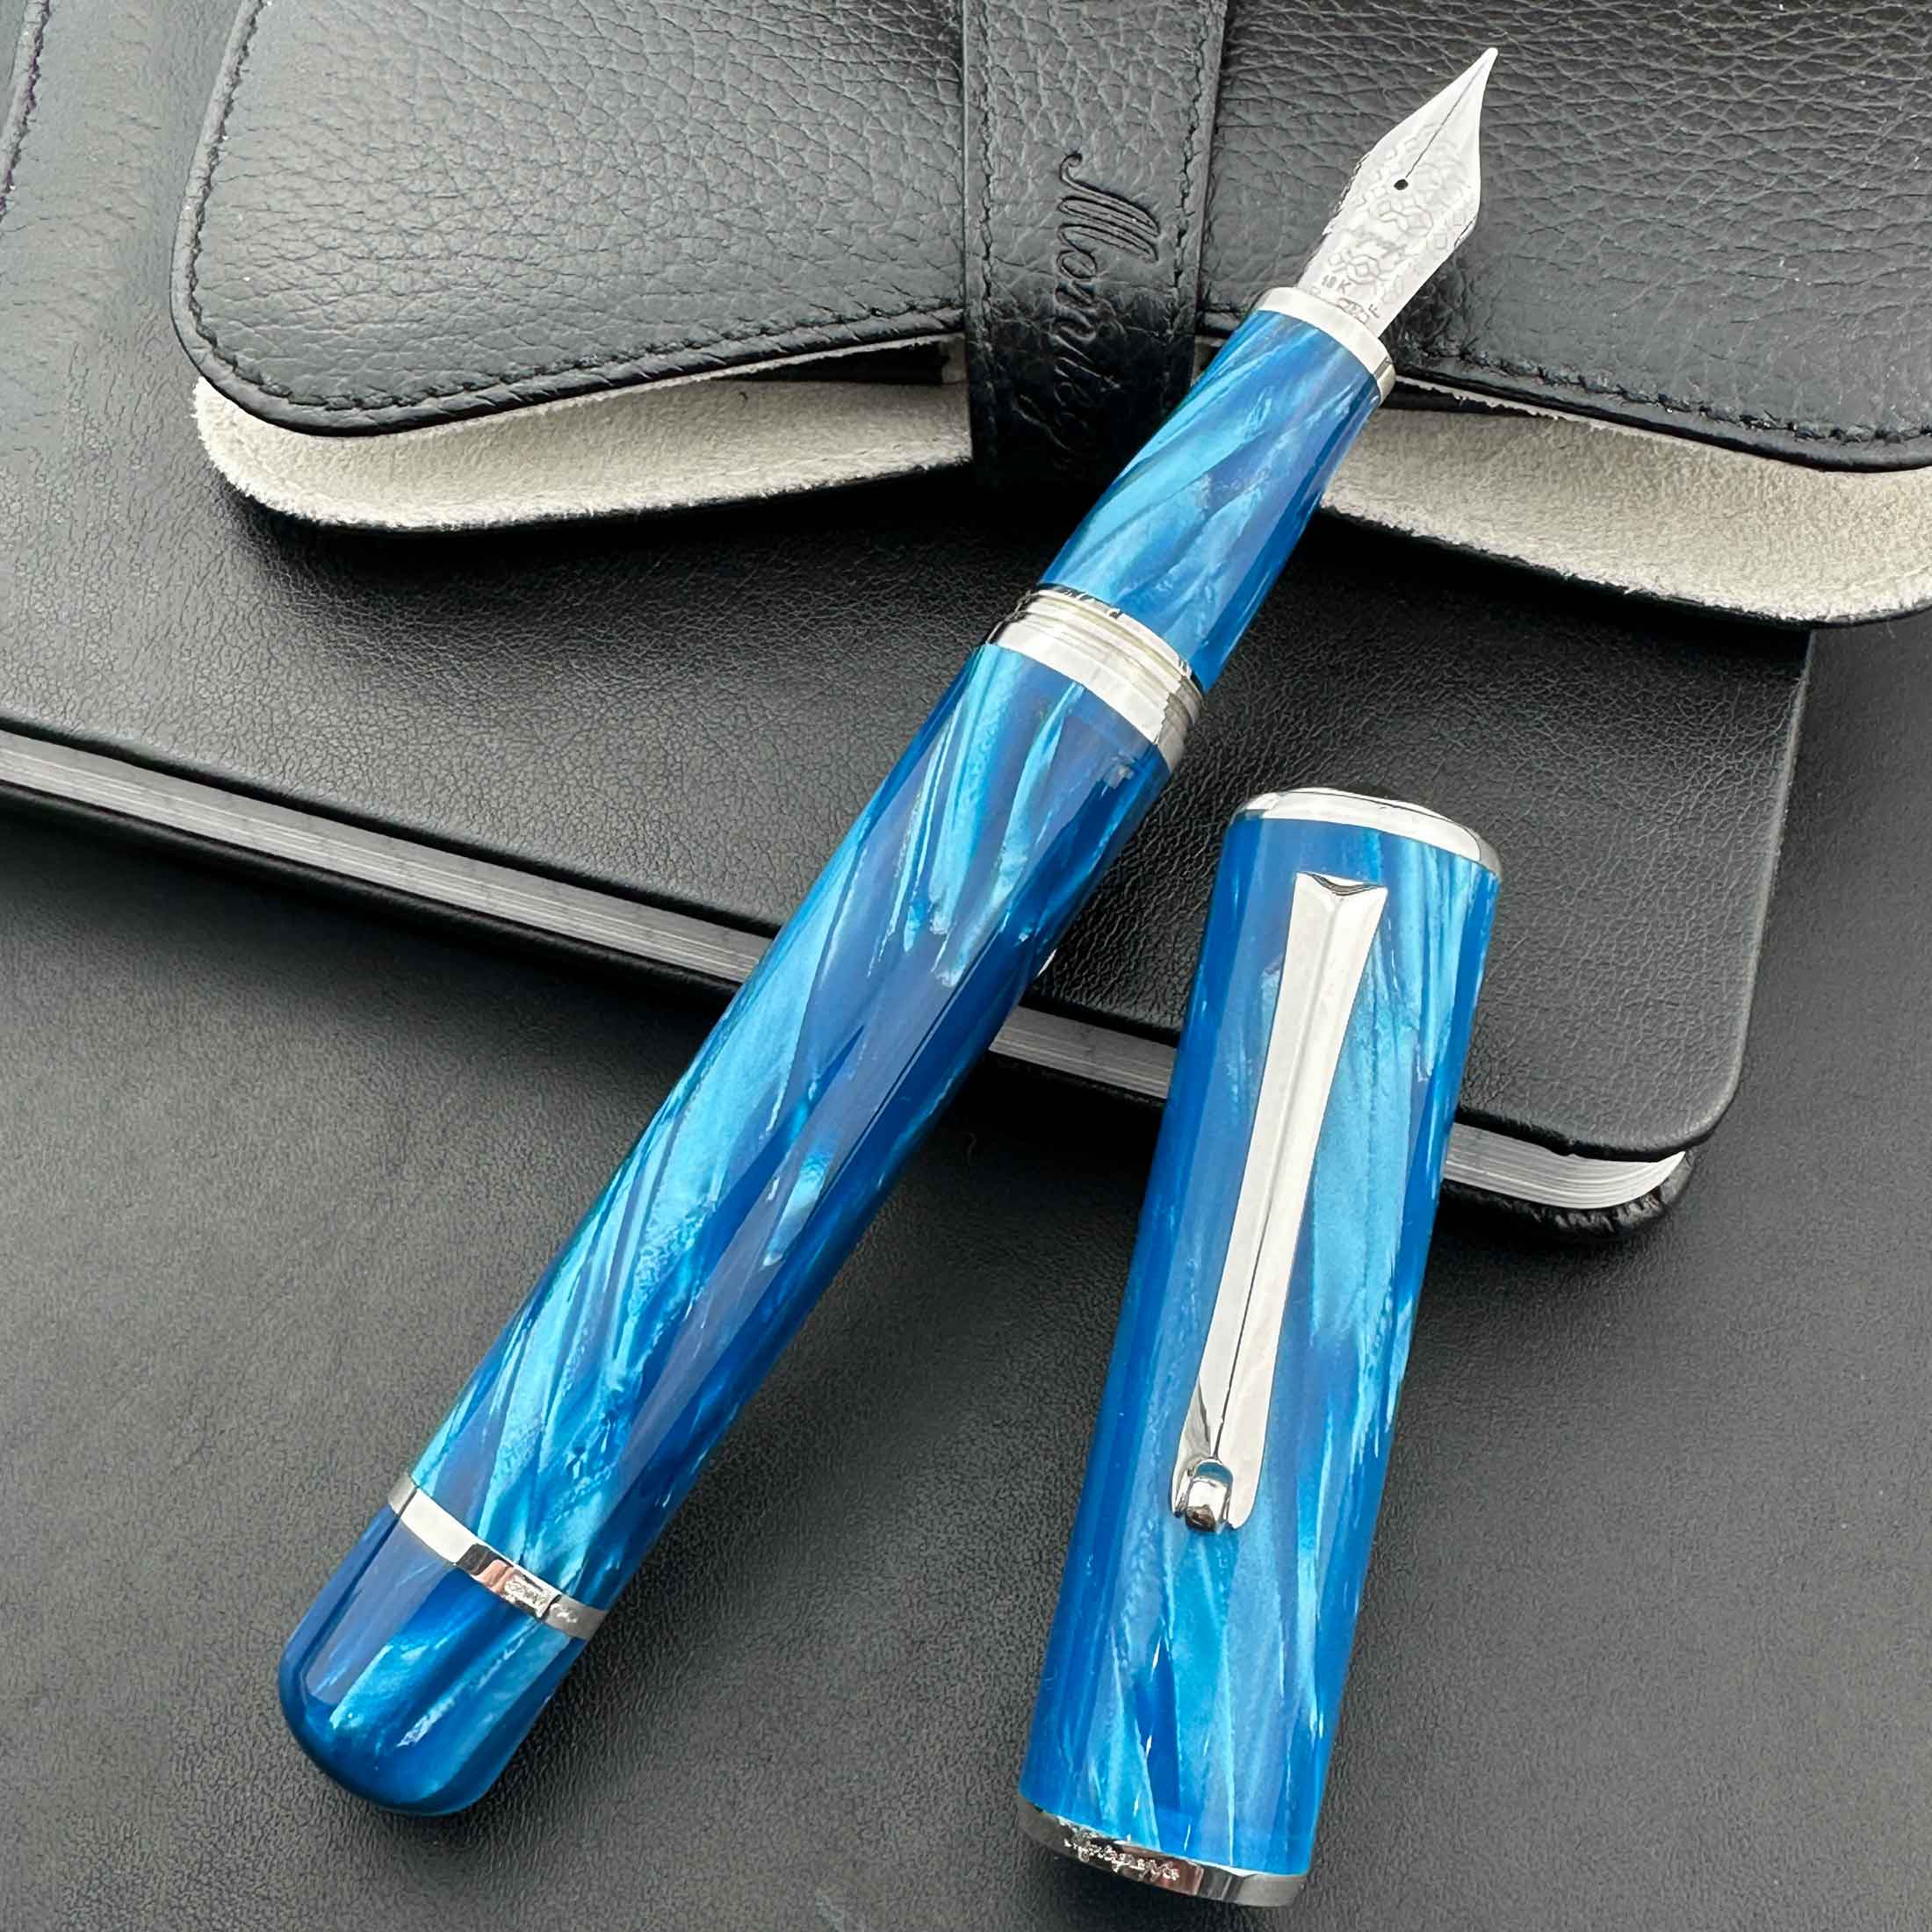 Montegrappa-celluloid-masters-arte-fountain-pen-turquoise-nibsmith